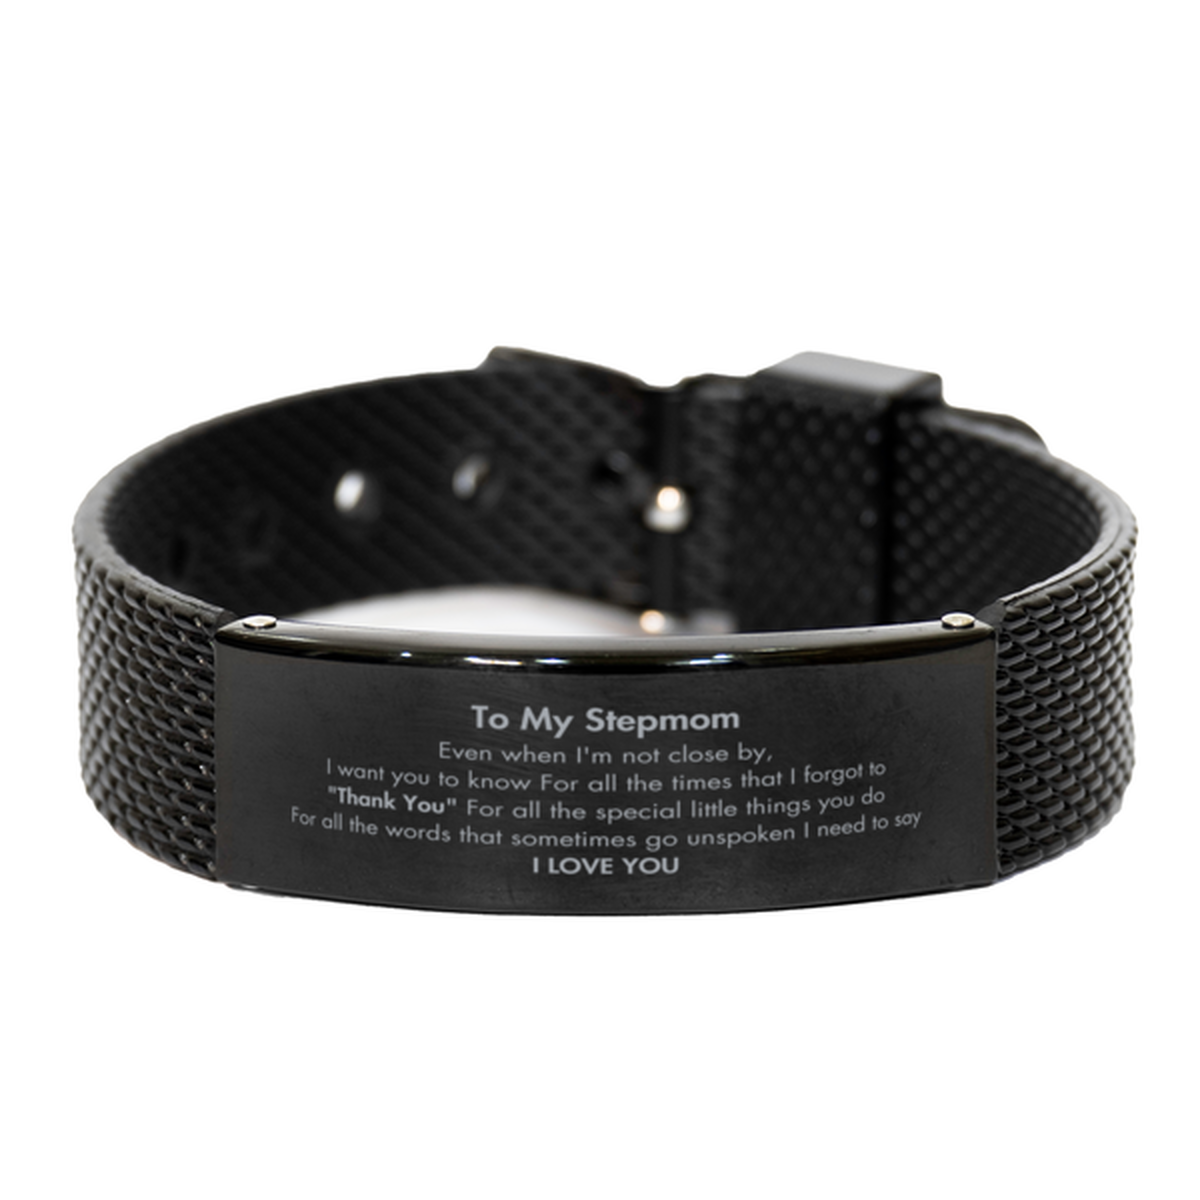 Thank You Gifts for Stepmom, Keepsake Black Shark Mesh Bracelet Gifts for Stepmom Birthday Mother's day Father's Day Stepmom For all the words That sometimes go unspoken I need to say I LOVE YOU